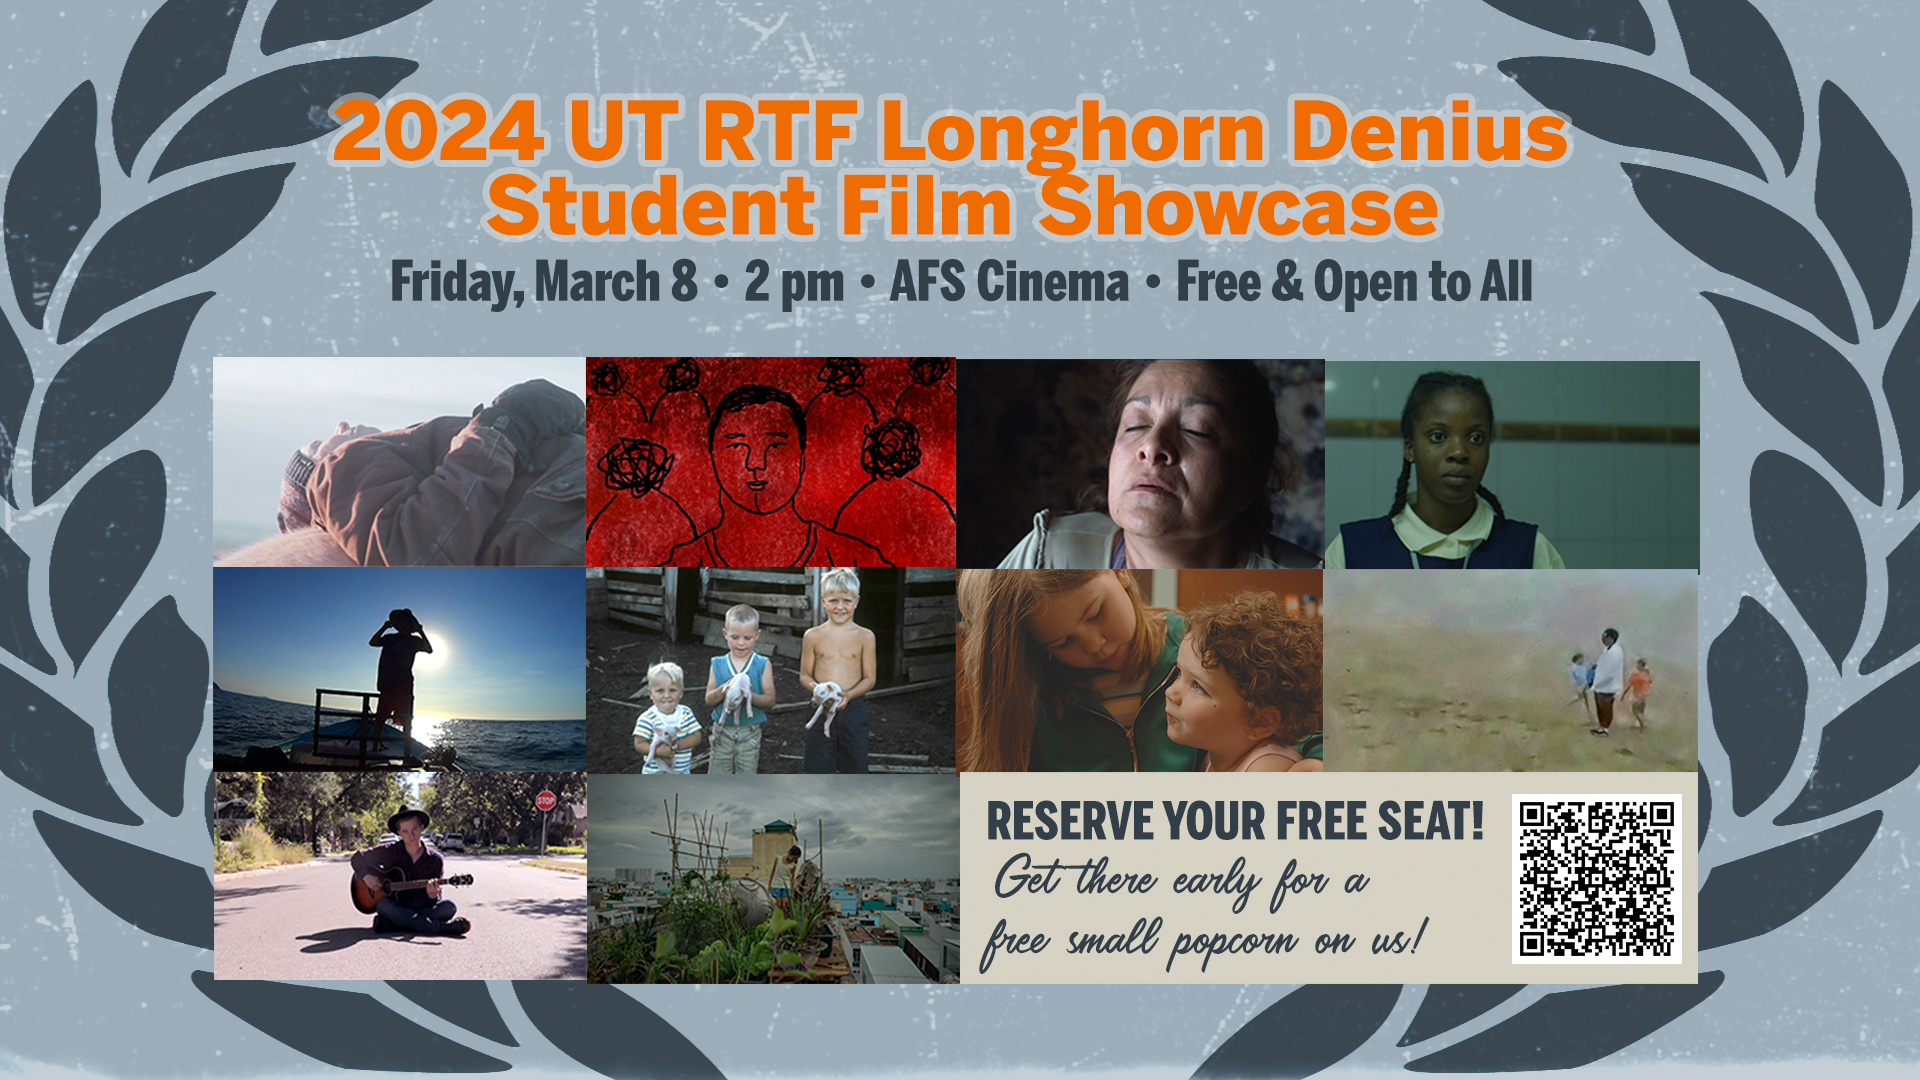 2024 UT RTF Longhorn Denius Student FIlm Showcase Friday March 8 at 2 pm at AFS cinema. Reserve your spot.